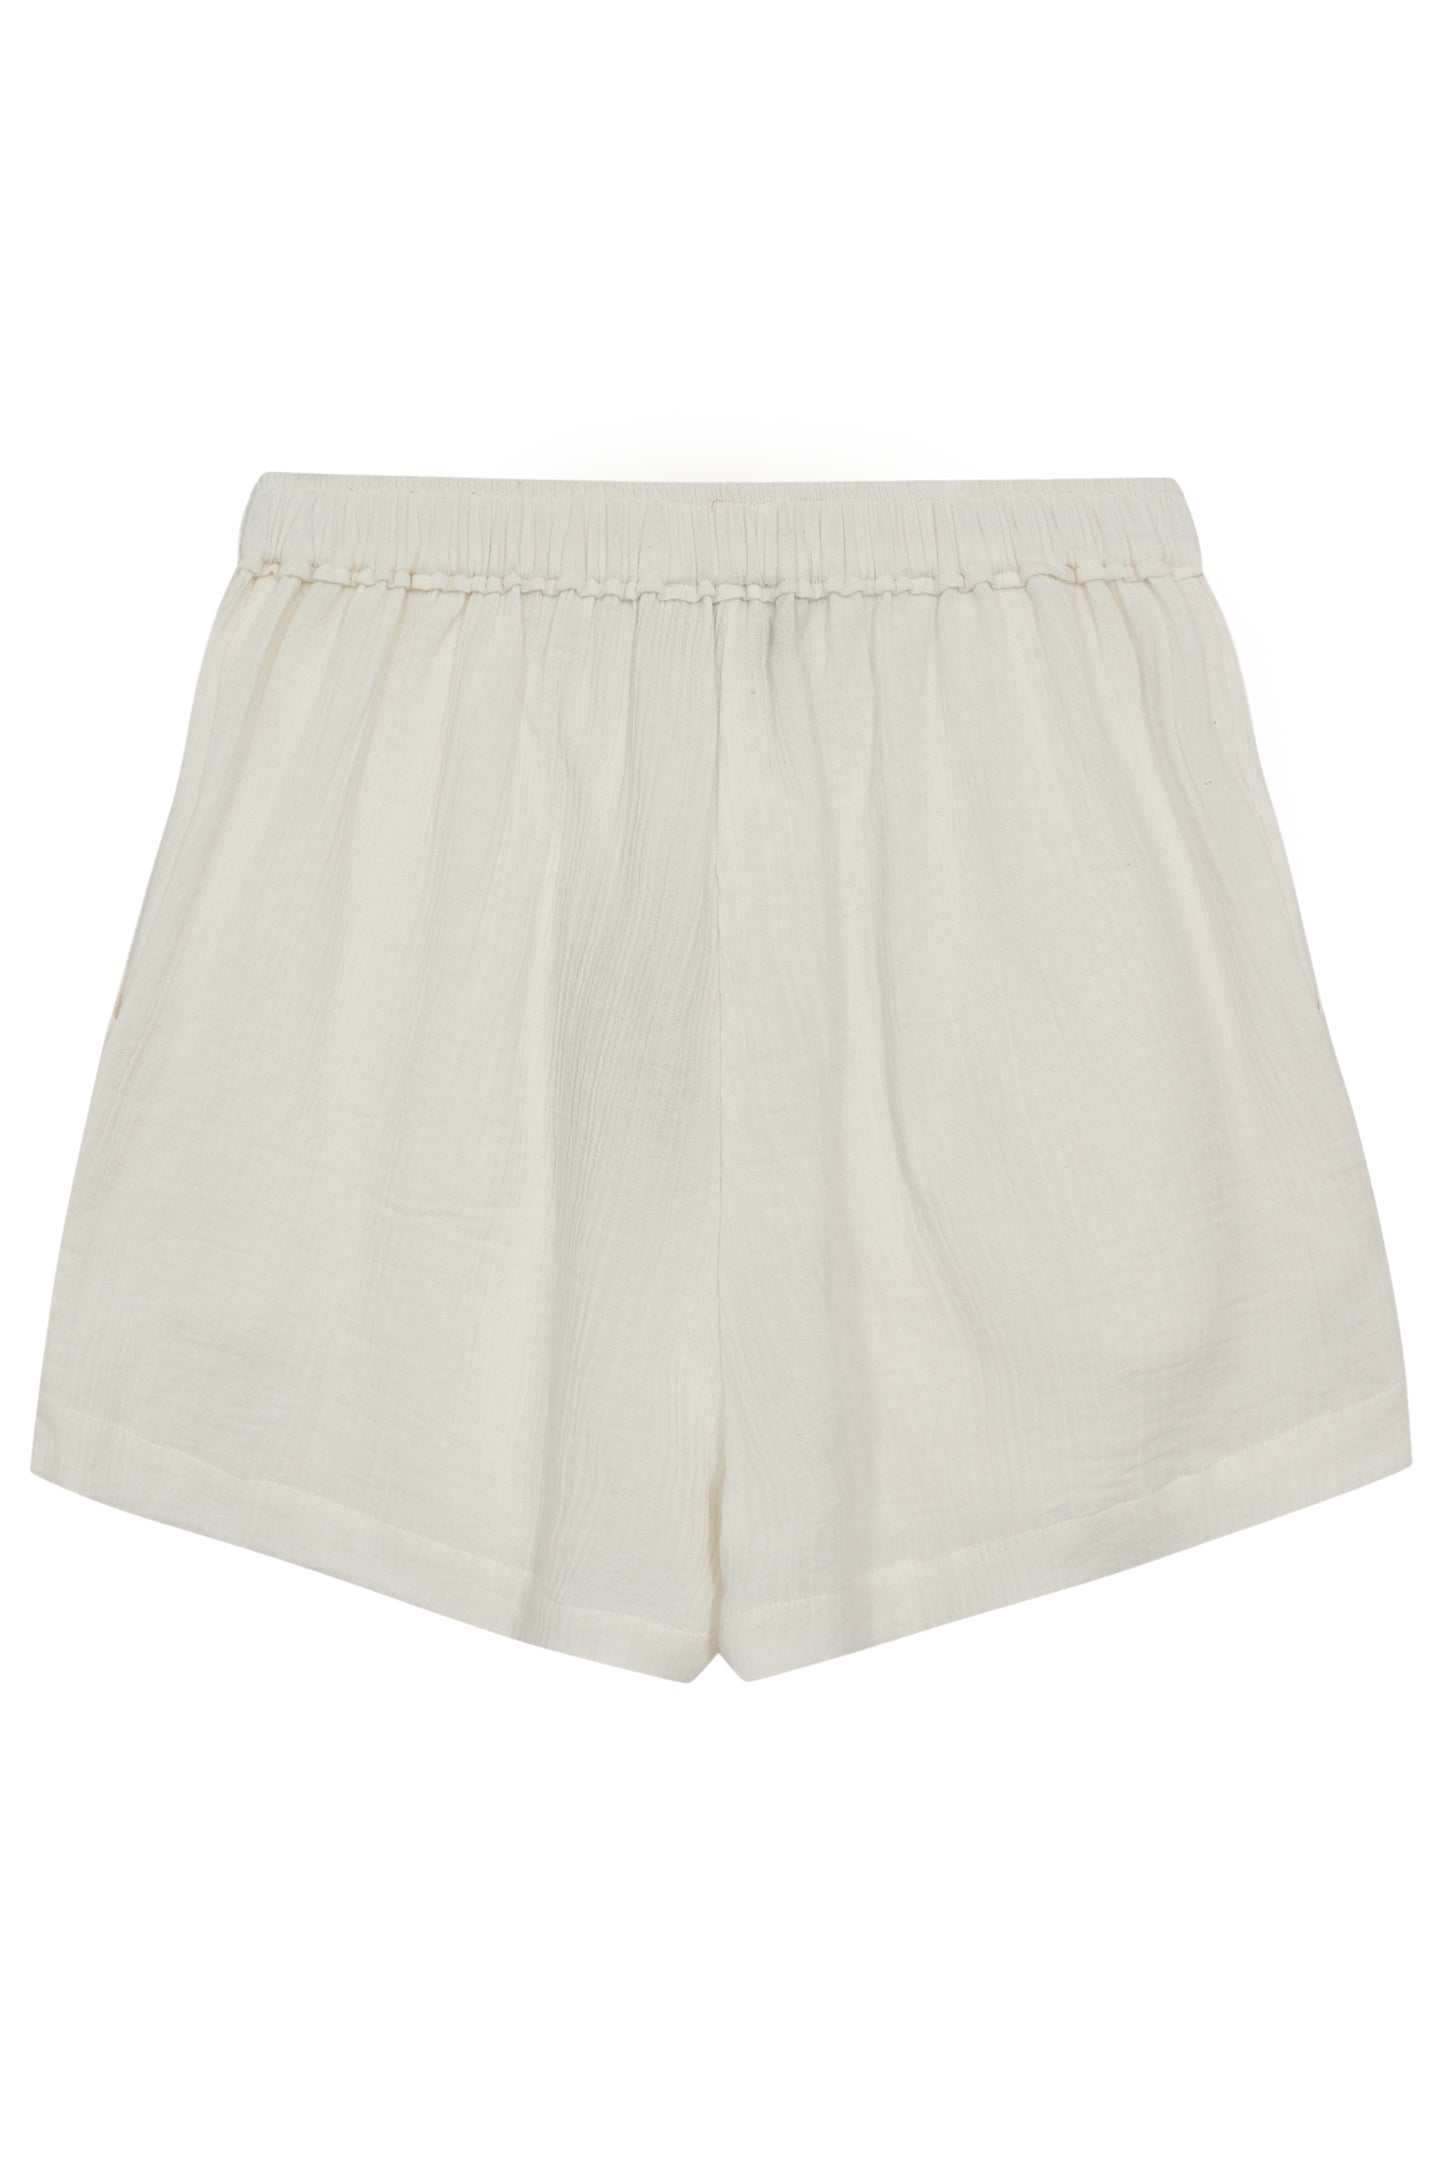 G LUCY SHORTS